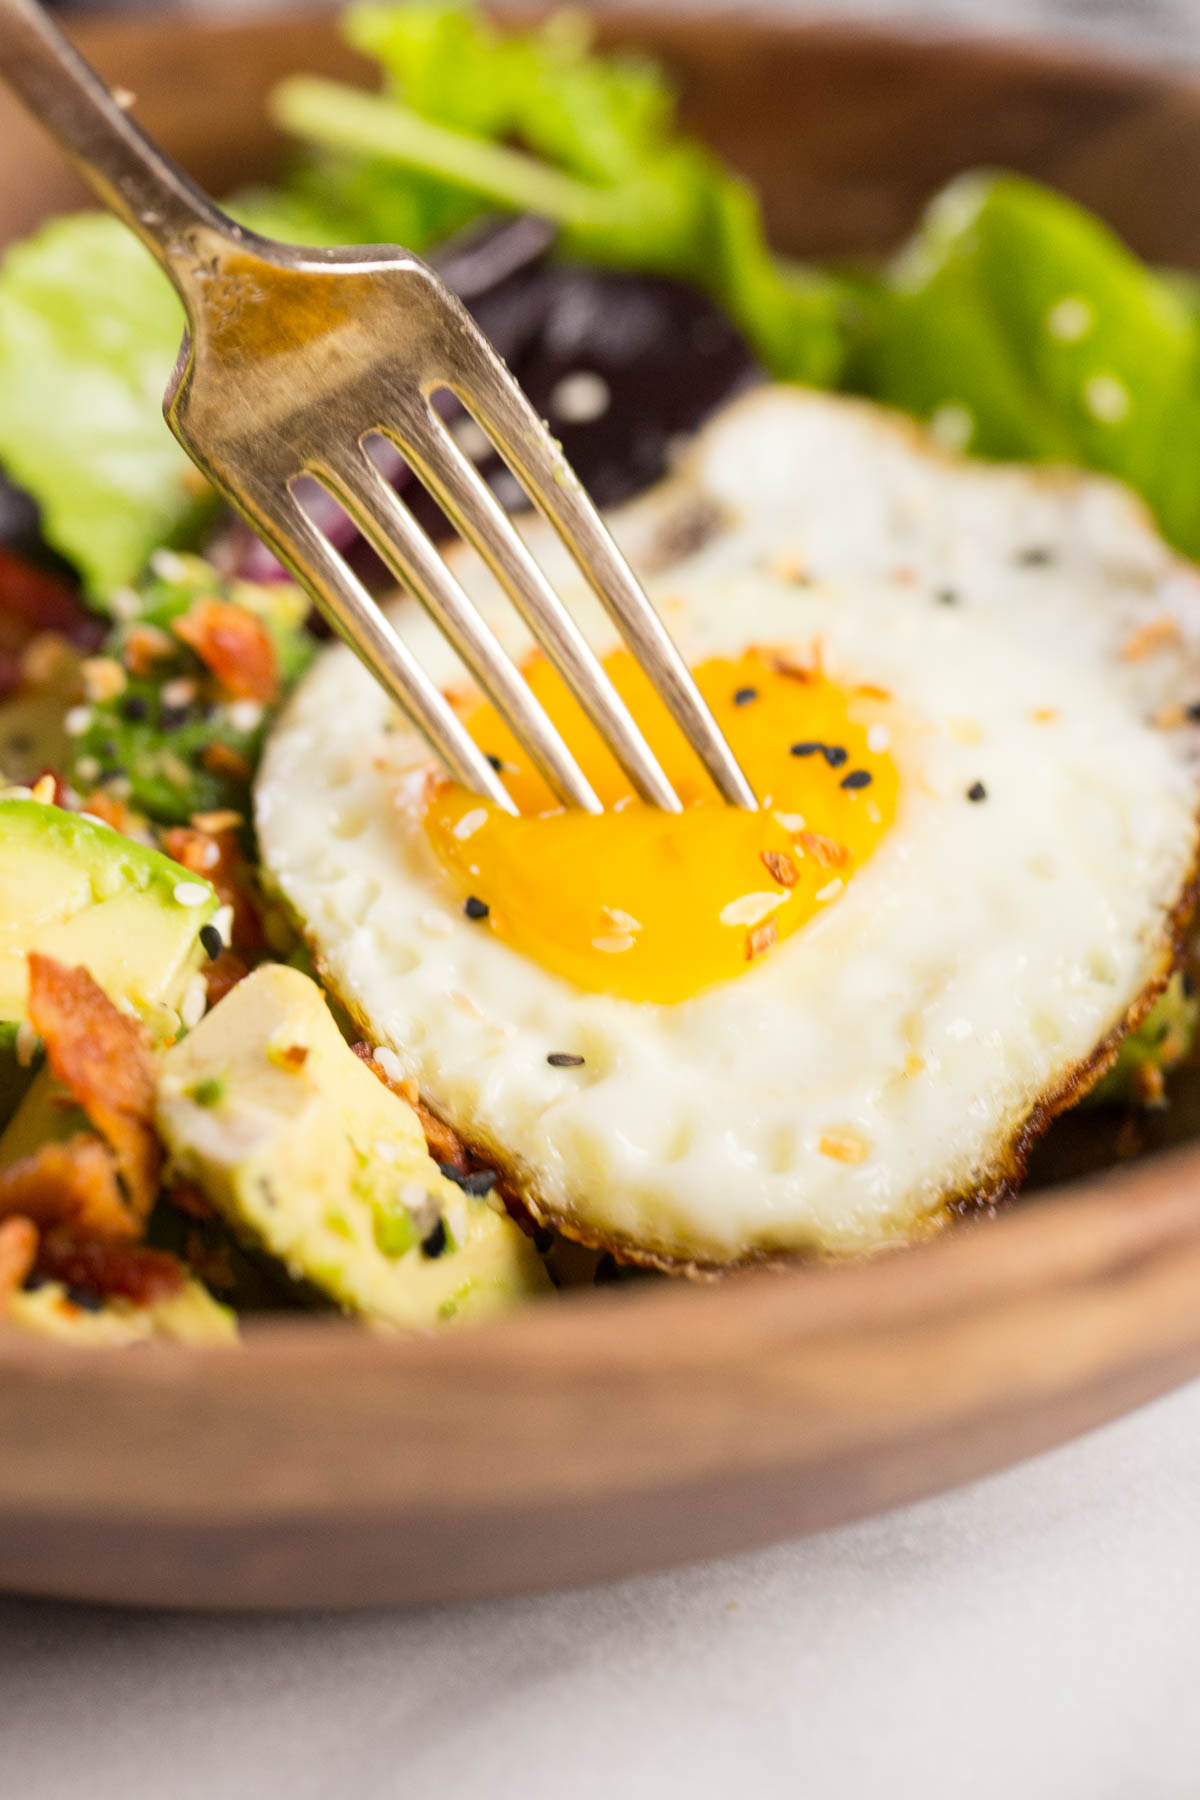 Avocado Breakfast Bowl in a wood bowl with a fork poking into the egg yolk.  